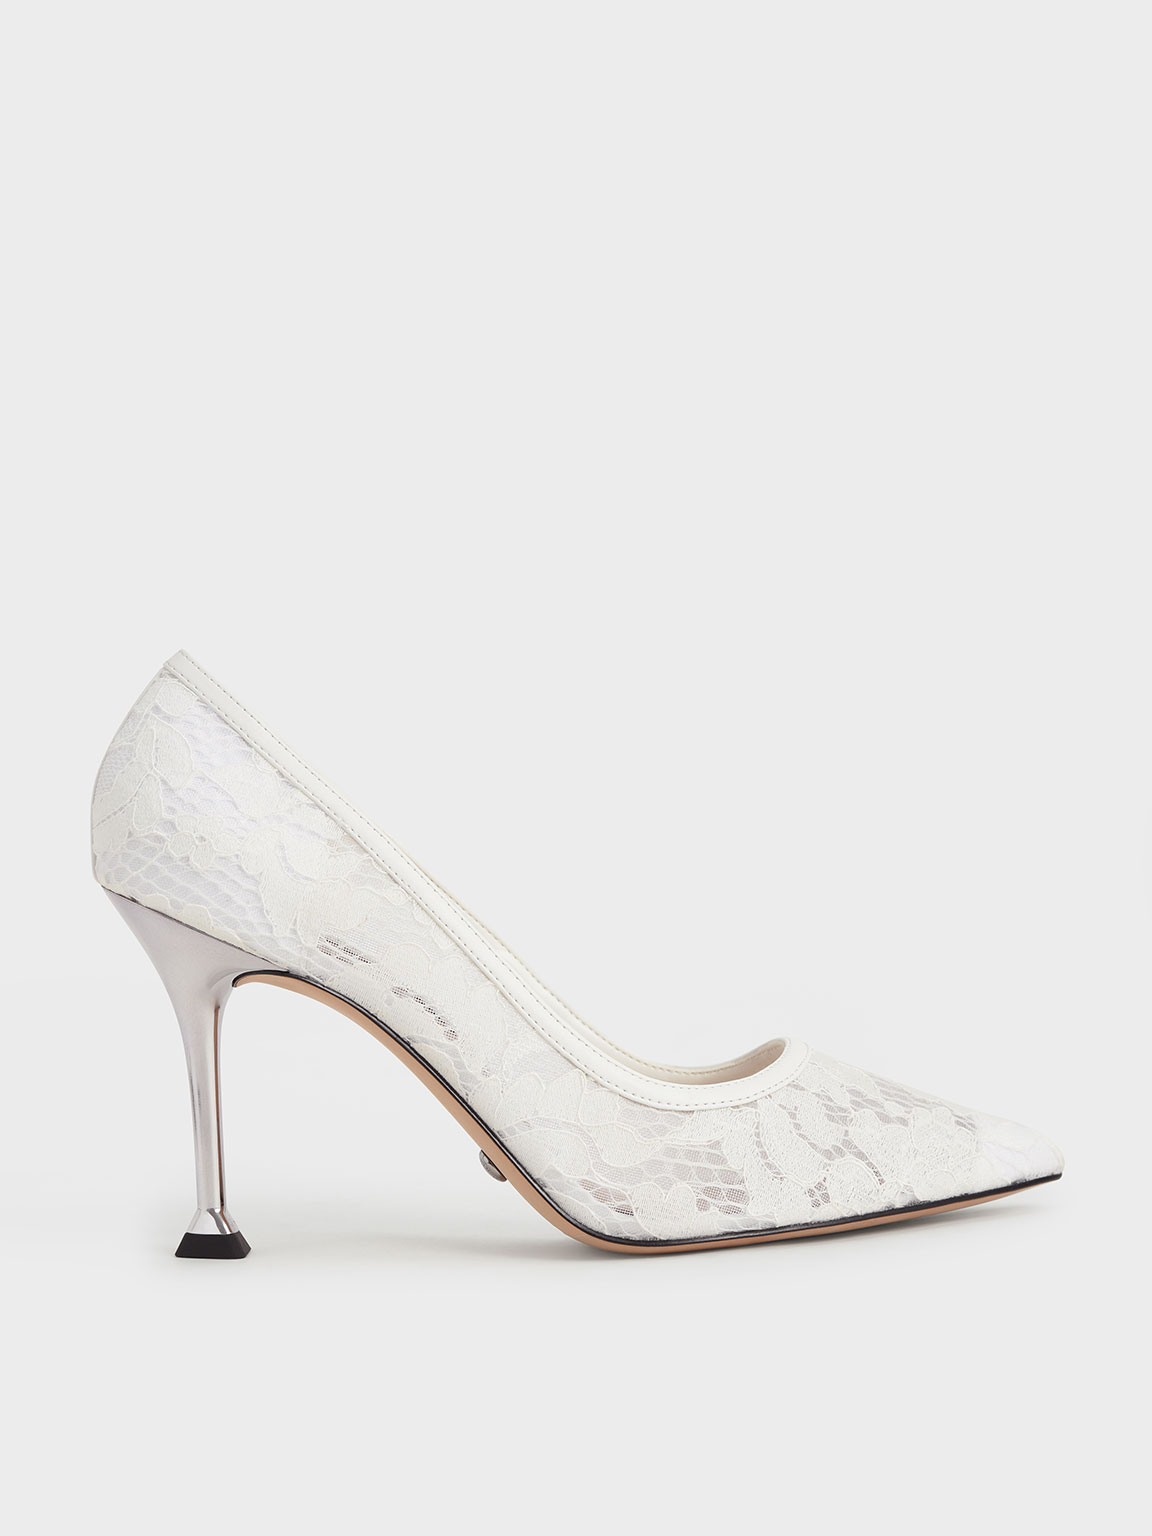 Charles & Keith Bow Detail D'Orsay Kitten Heels | Kitten heels, Charles and  keith shoes, Heels